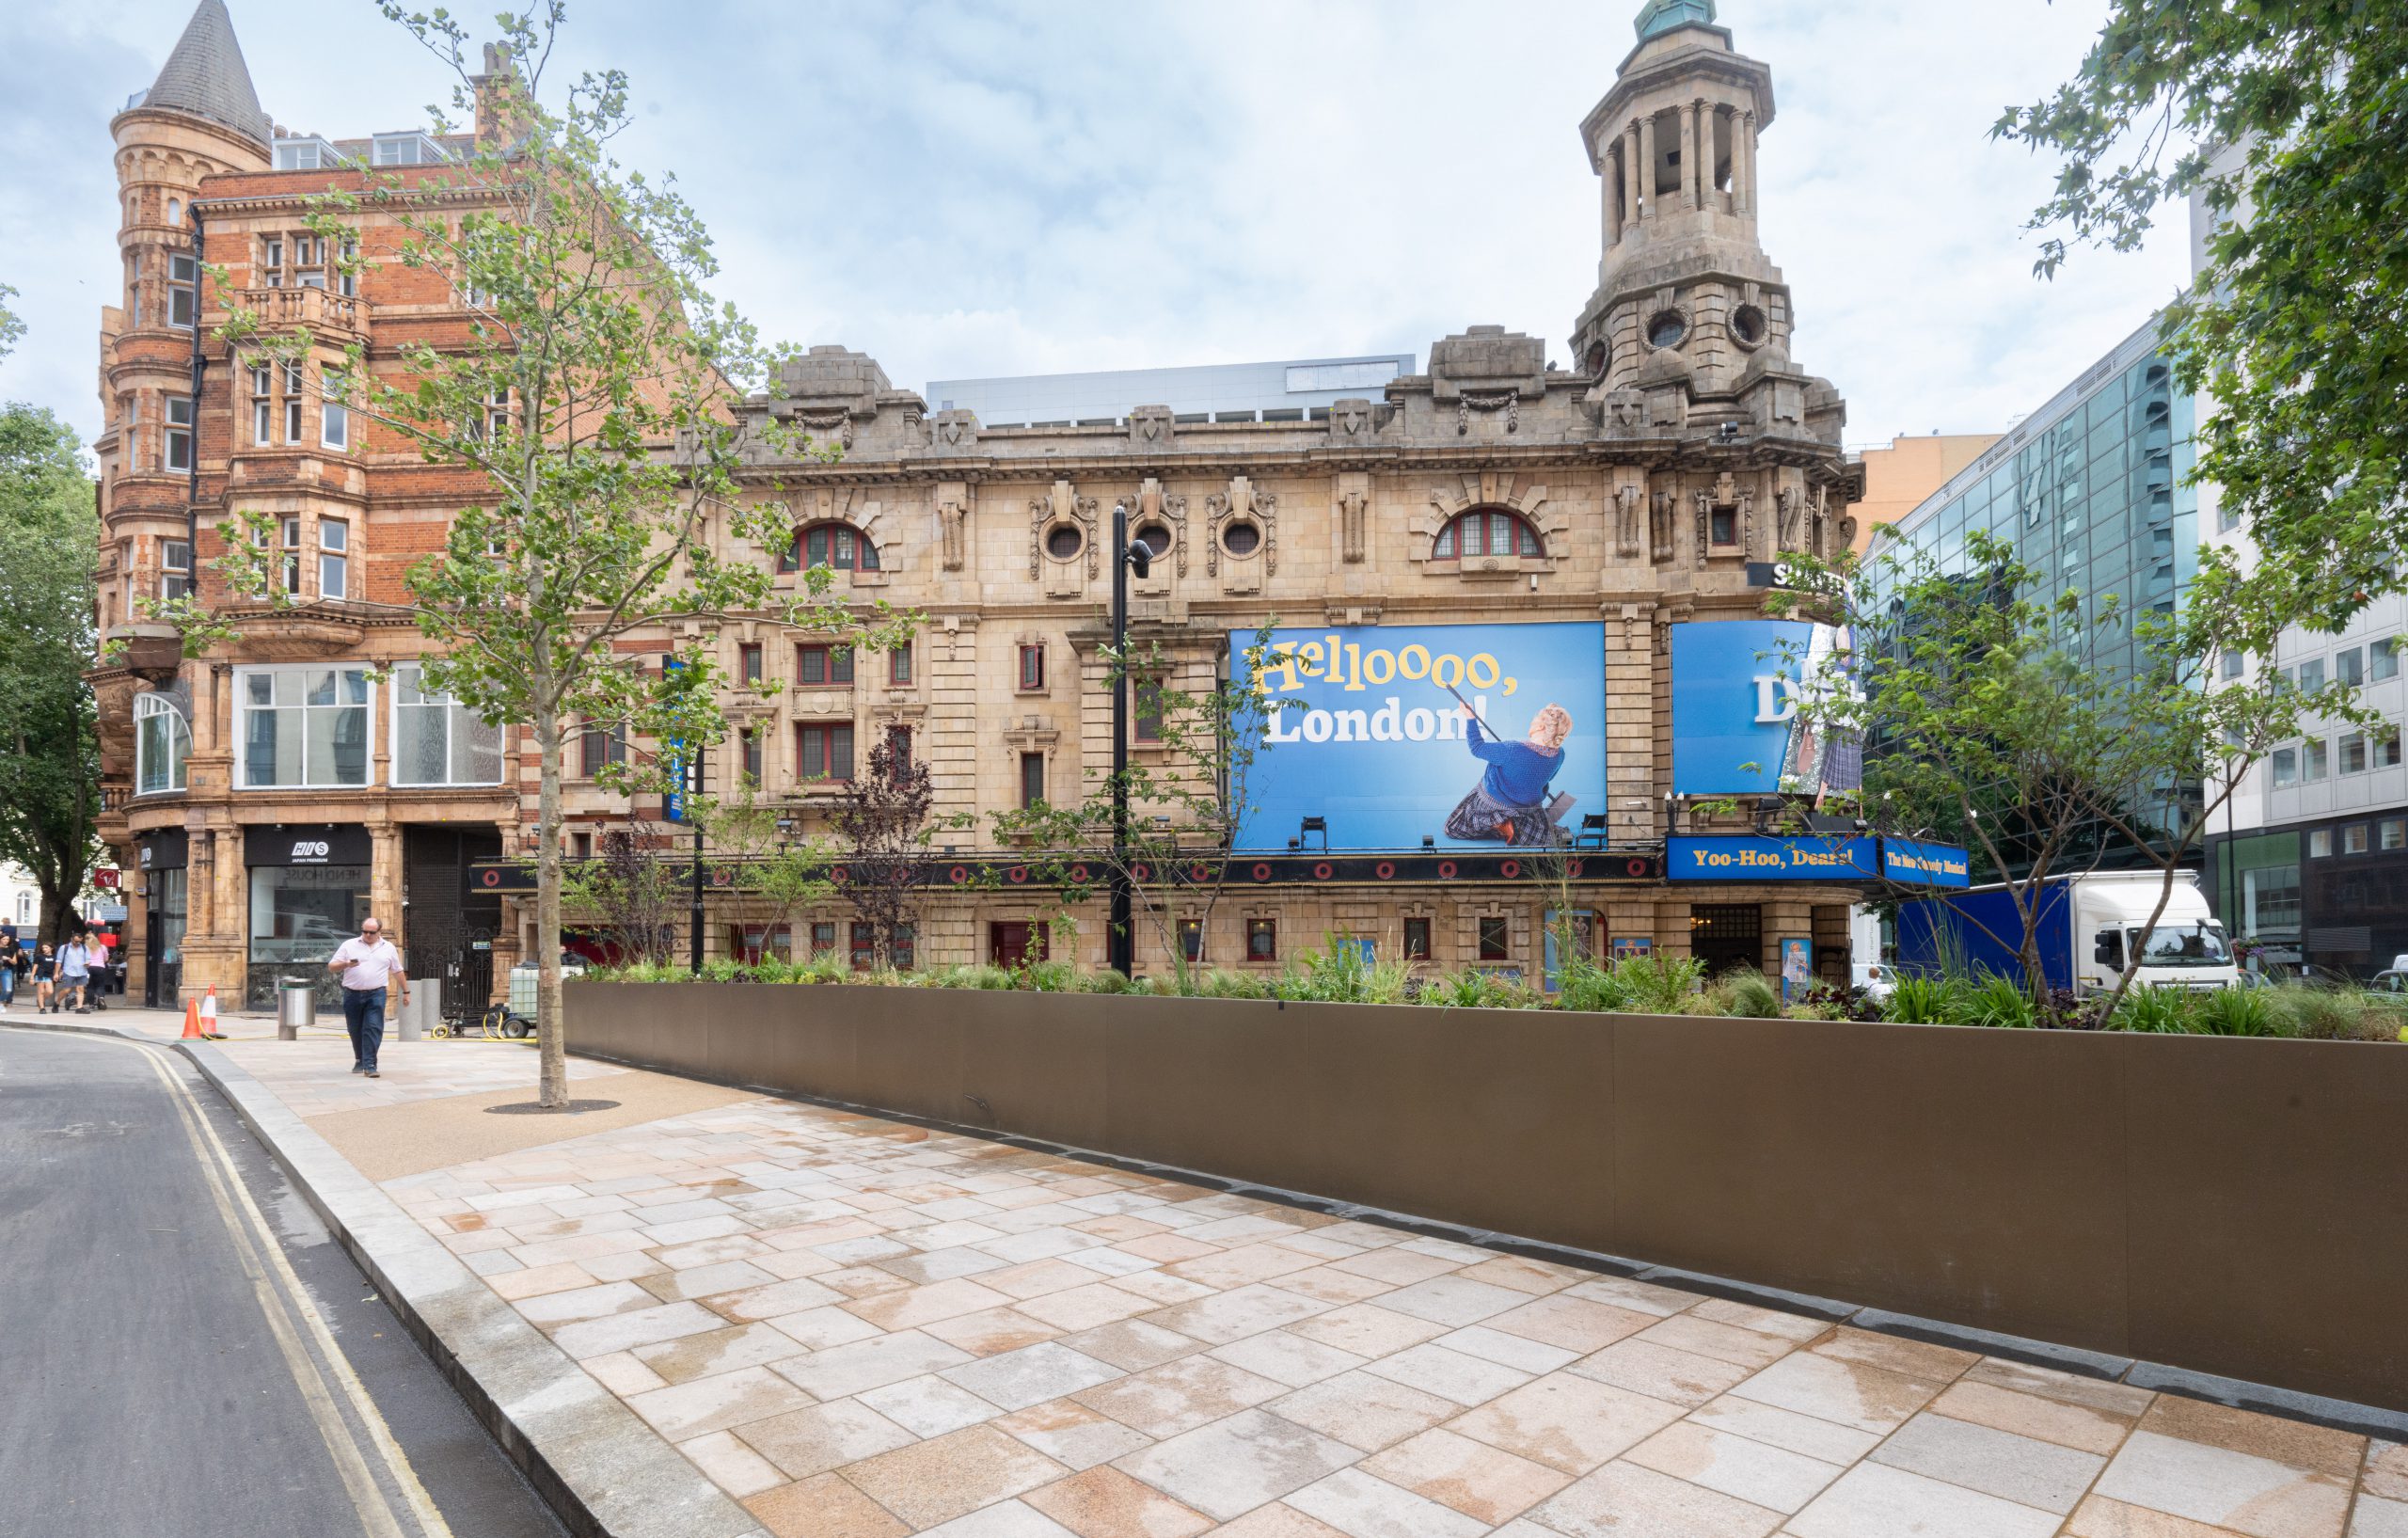 View of the Shaftesbury theatre with new planting, wide pavements and public space